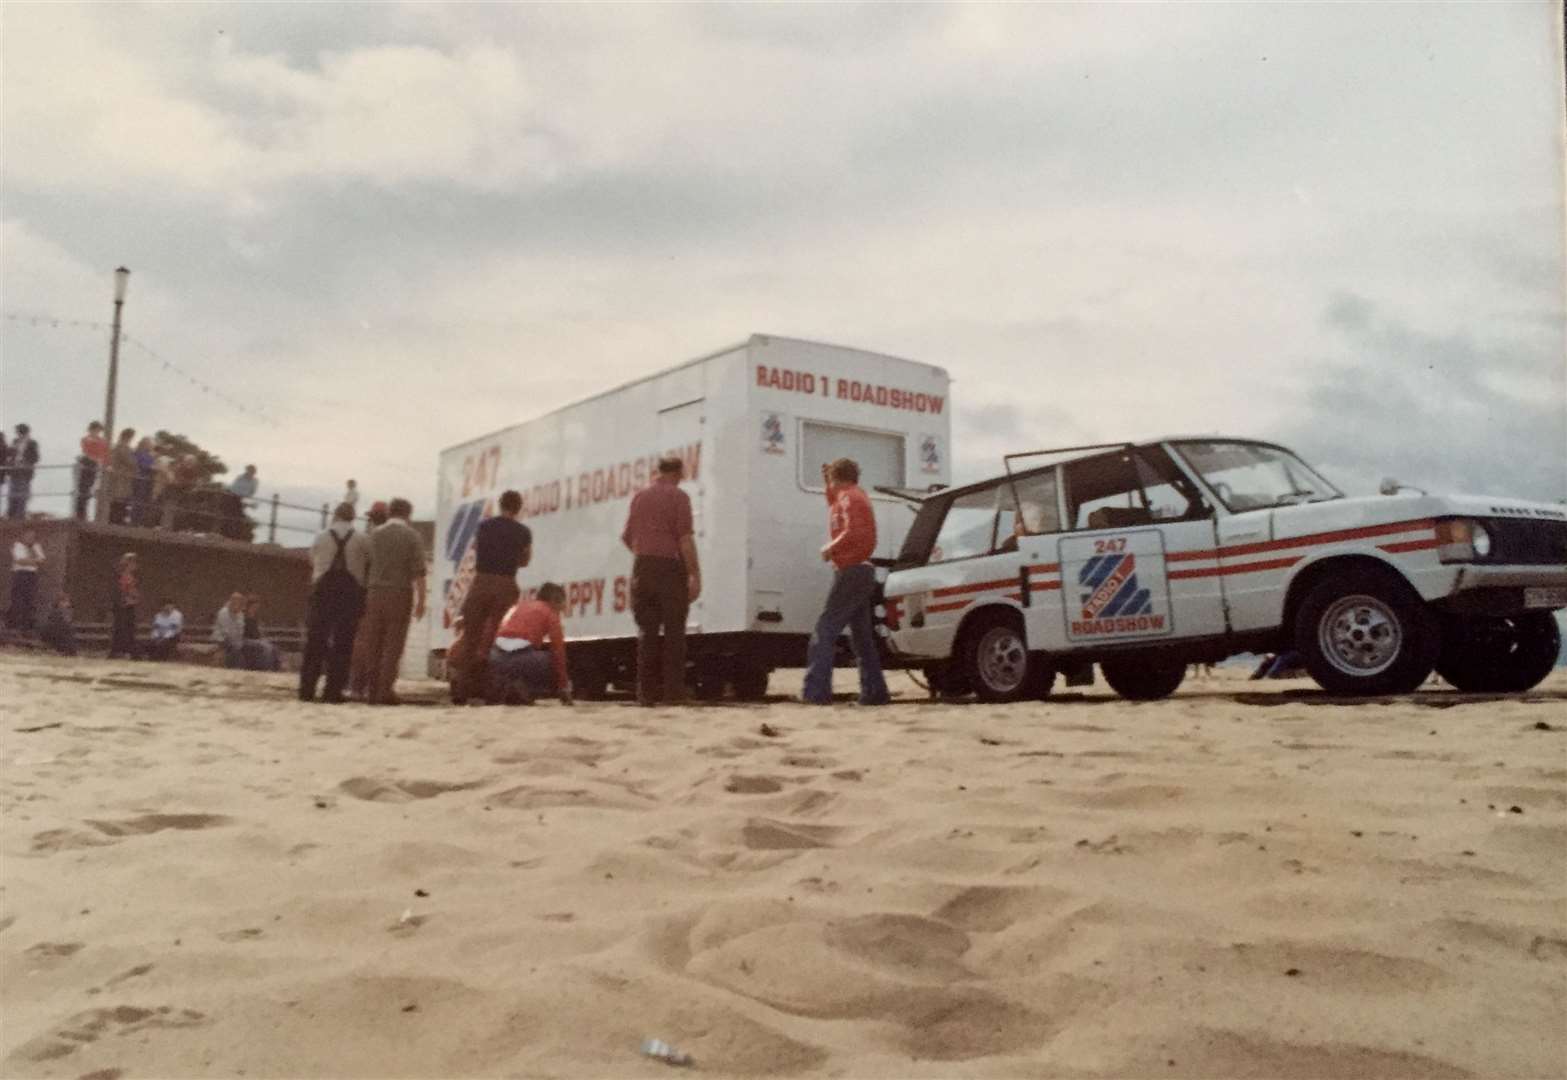 The roadshow truck gets stuck on the sand at Margate. Picture Tony Miles/Smiley Miley